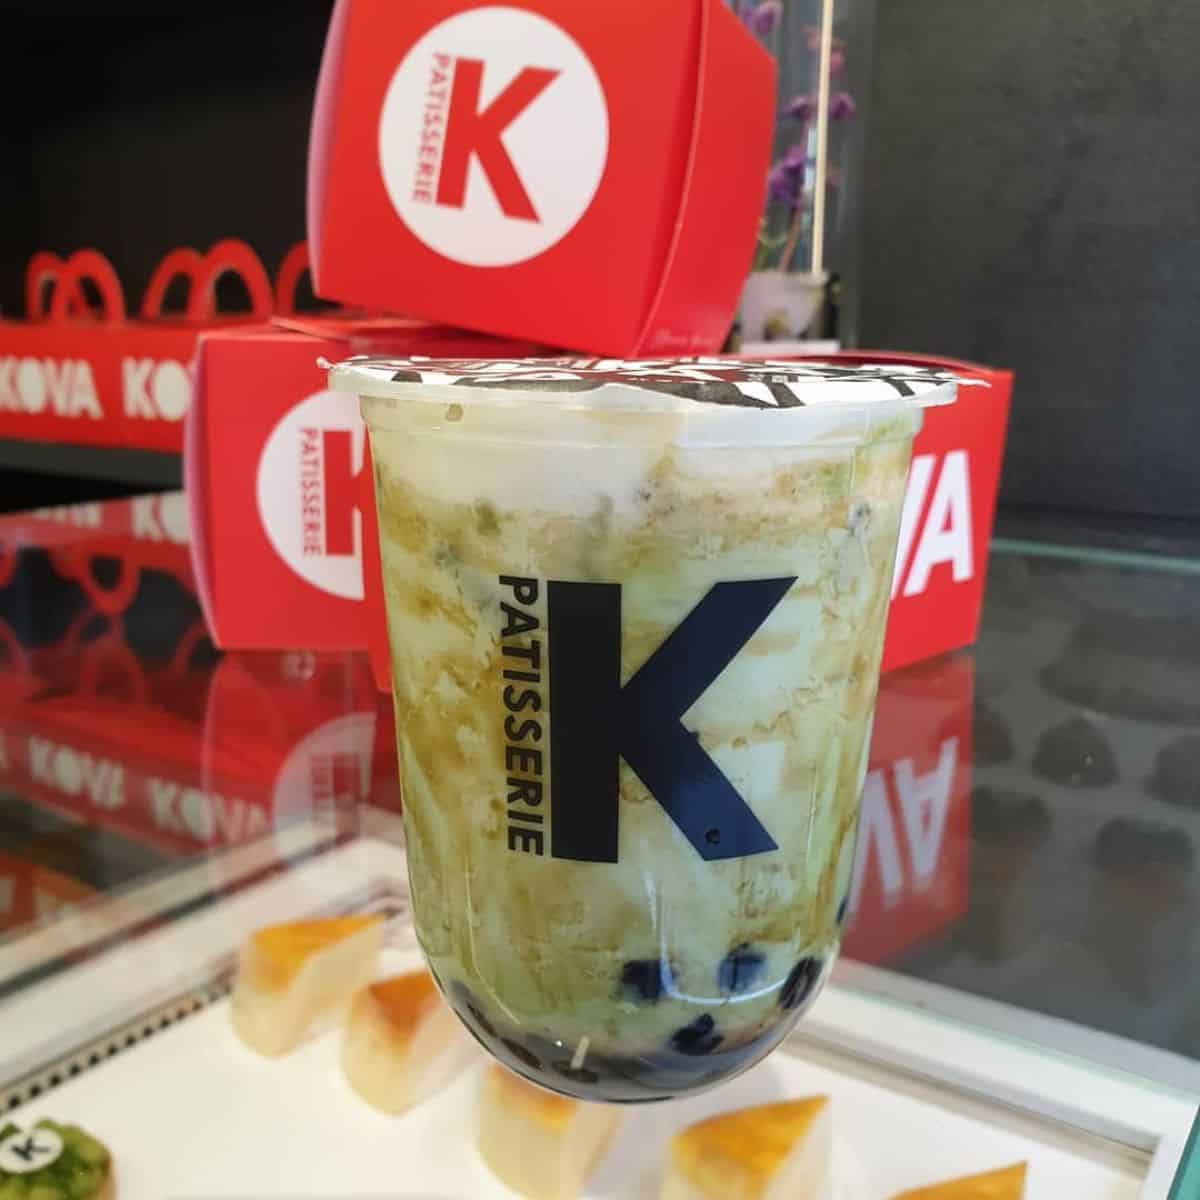 A luscious cup of a boba drink with red boxes in the background